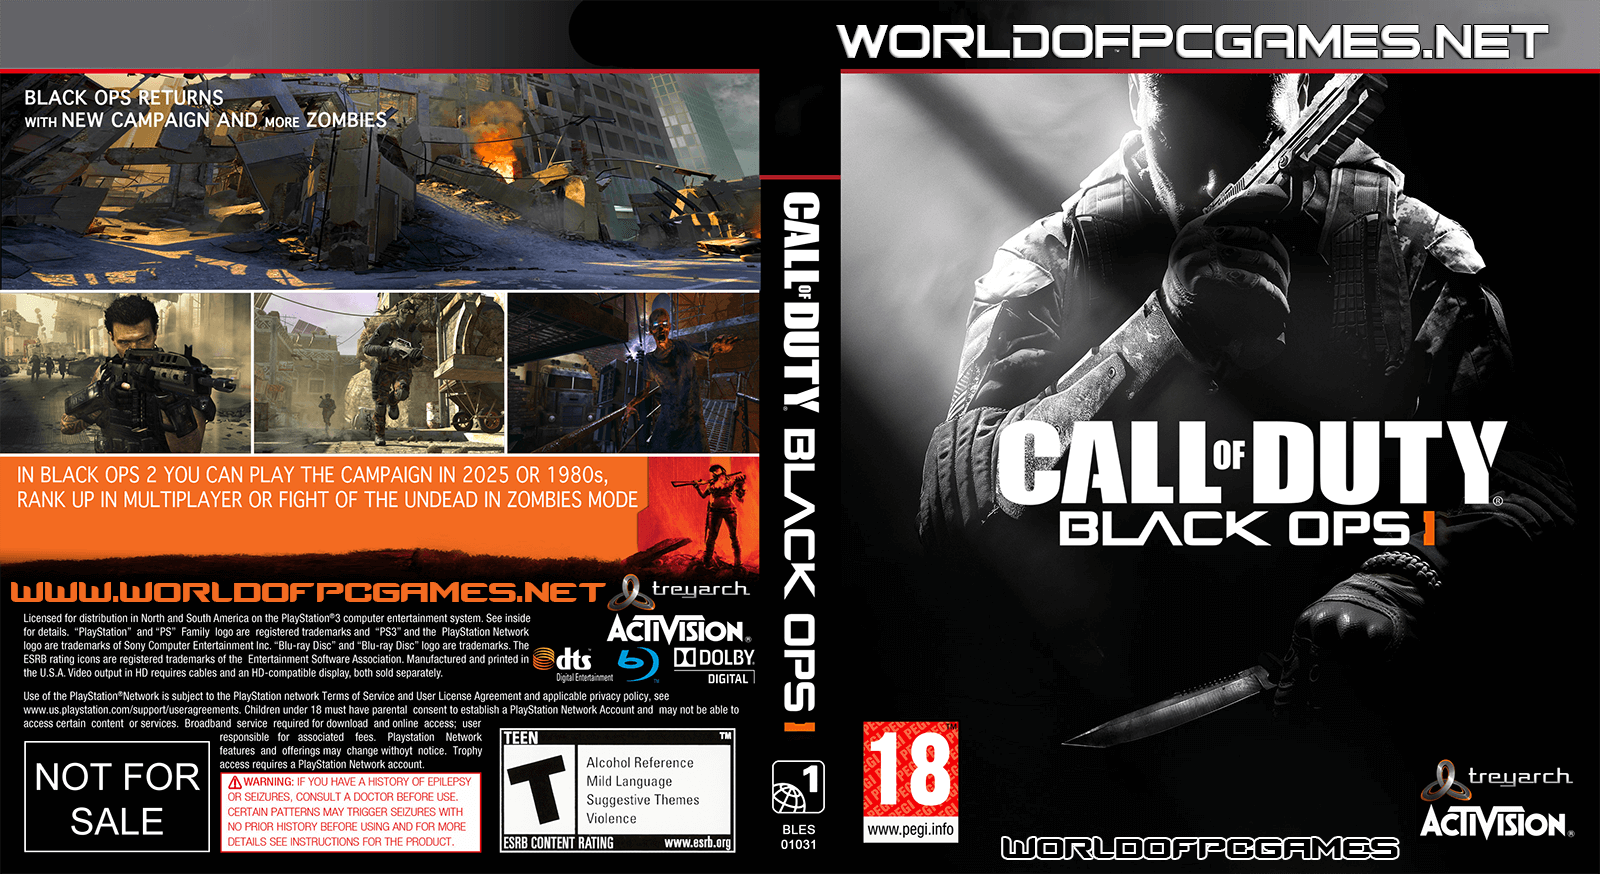 Black ops 2 PLAYSTATION. Call of Duty Black ops 3 ps3 диск. Call of Duty Black ops II ps3 обложка. Black ops 2 ps3. Код игры call of duty